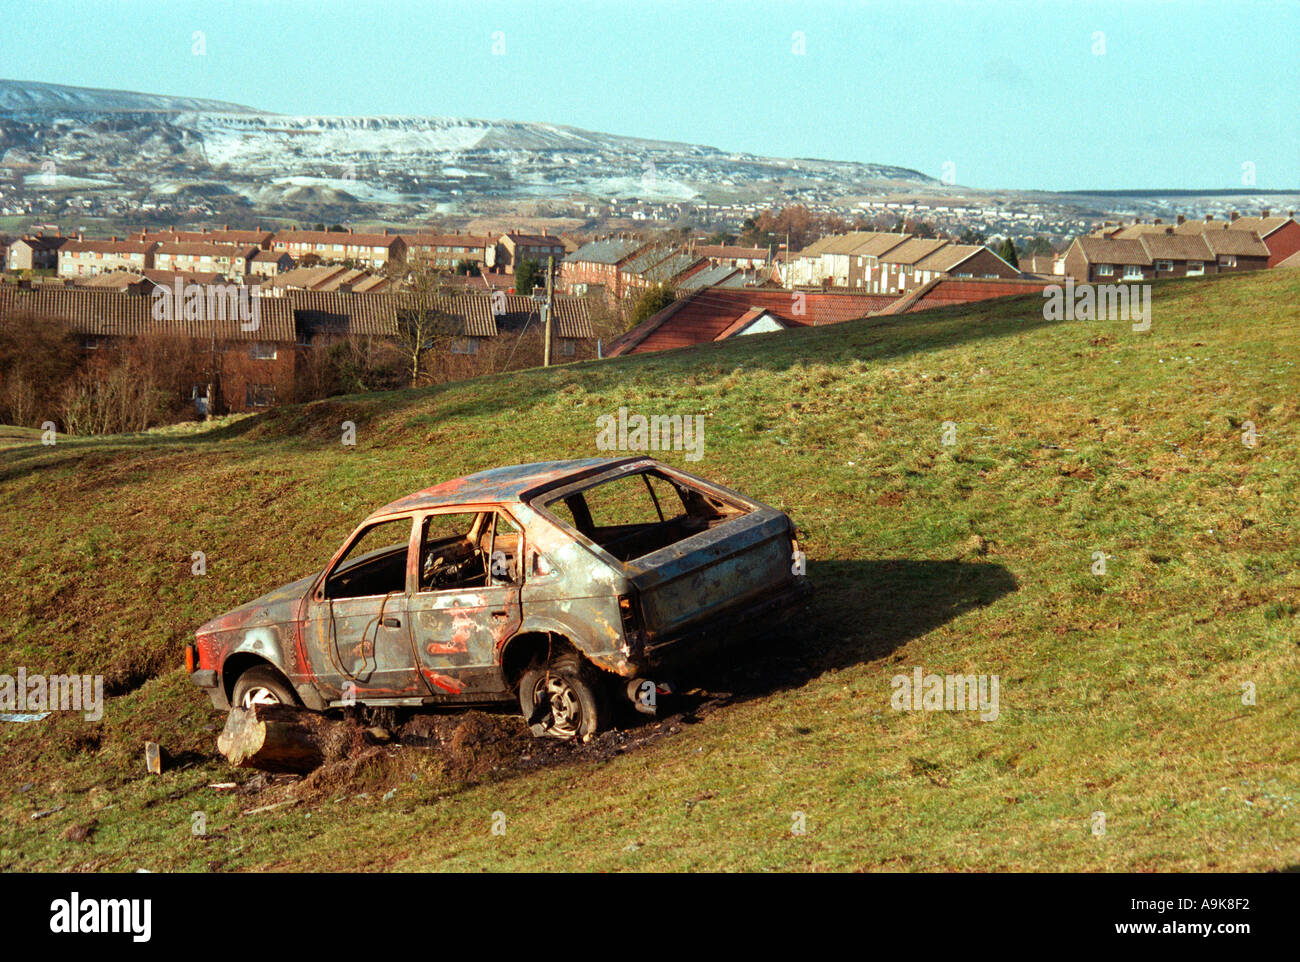 BURNT OUT ABANDONED STOLEN CAR ON THE GURNOS COUNCIL ESTATE IN MERTHYR TYDFIL IN SOUTH WALES, U.K. Stock Photo